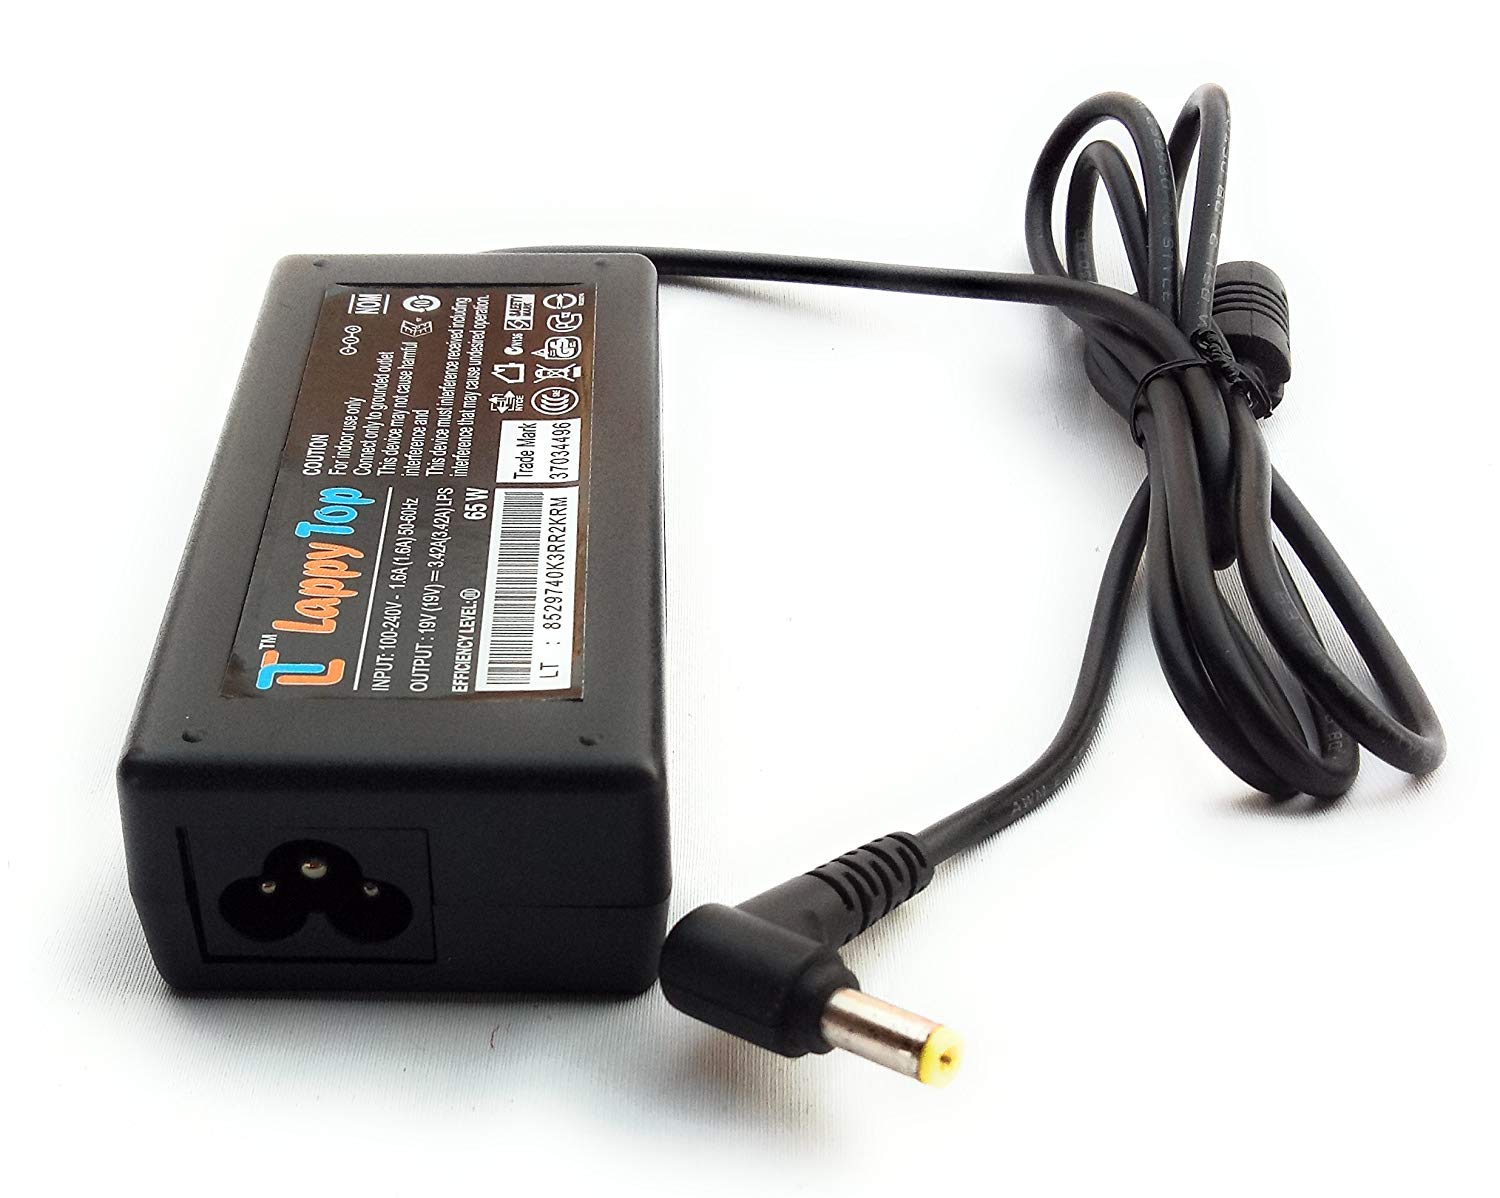 LT Lappy Top Laptop Adapter Charger